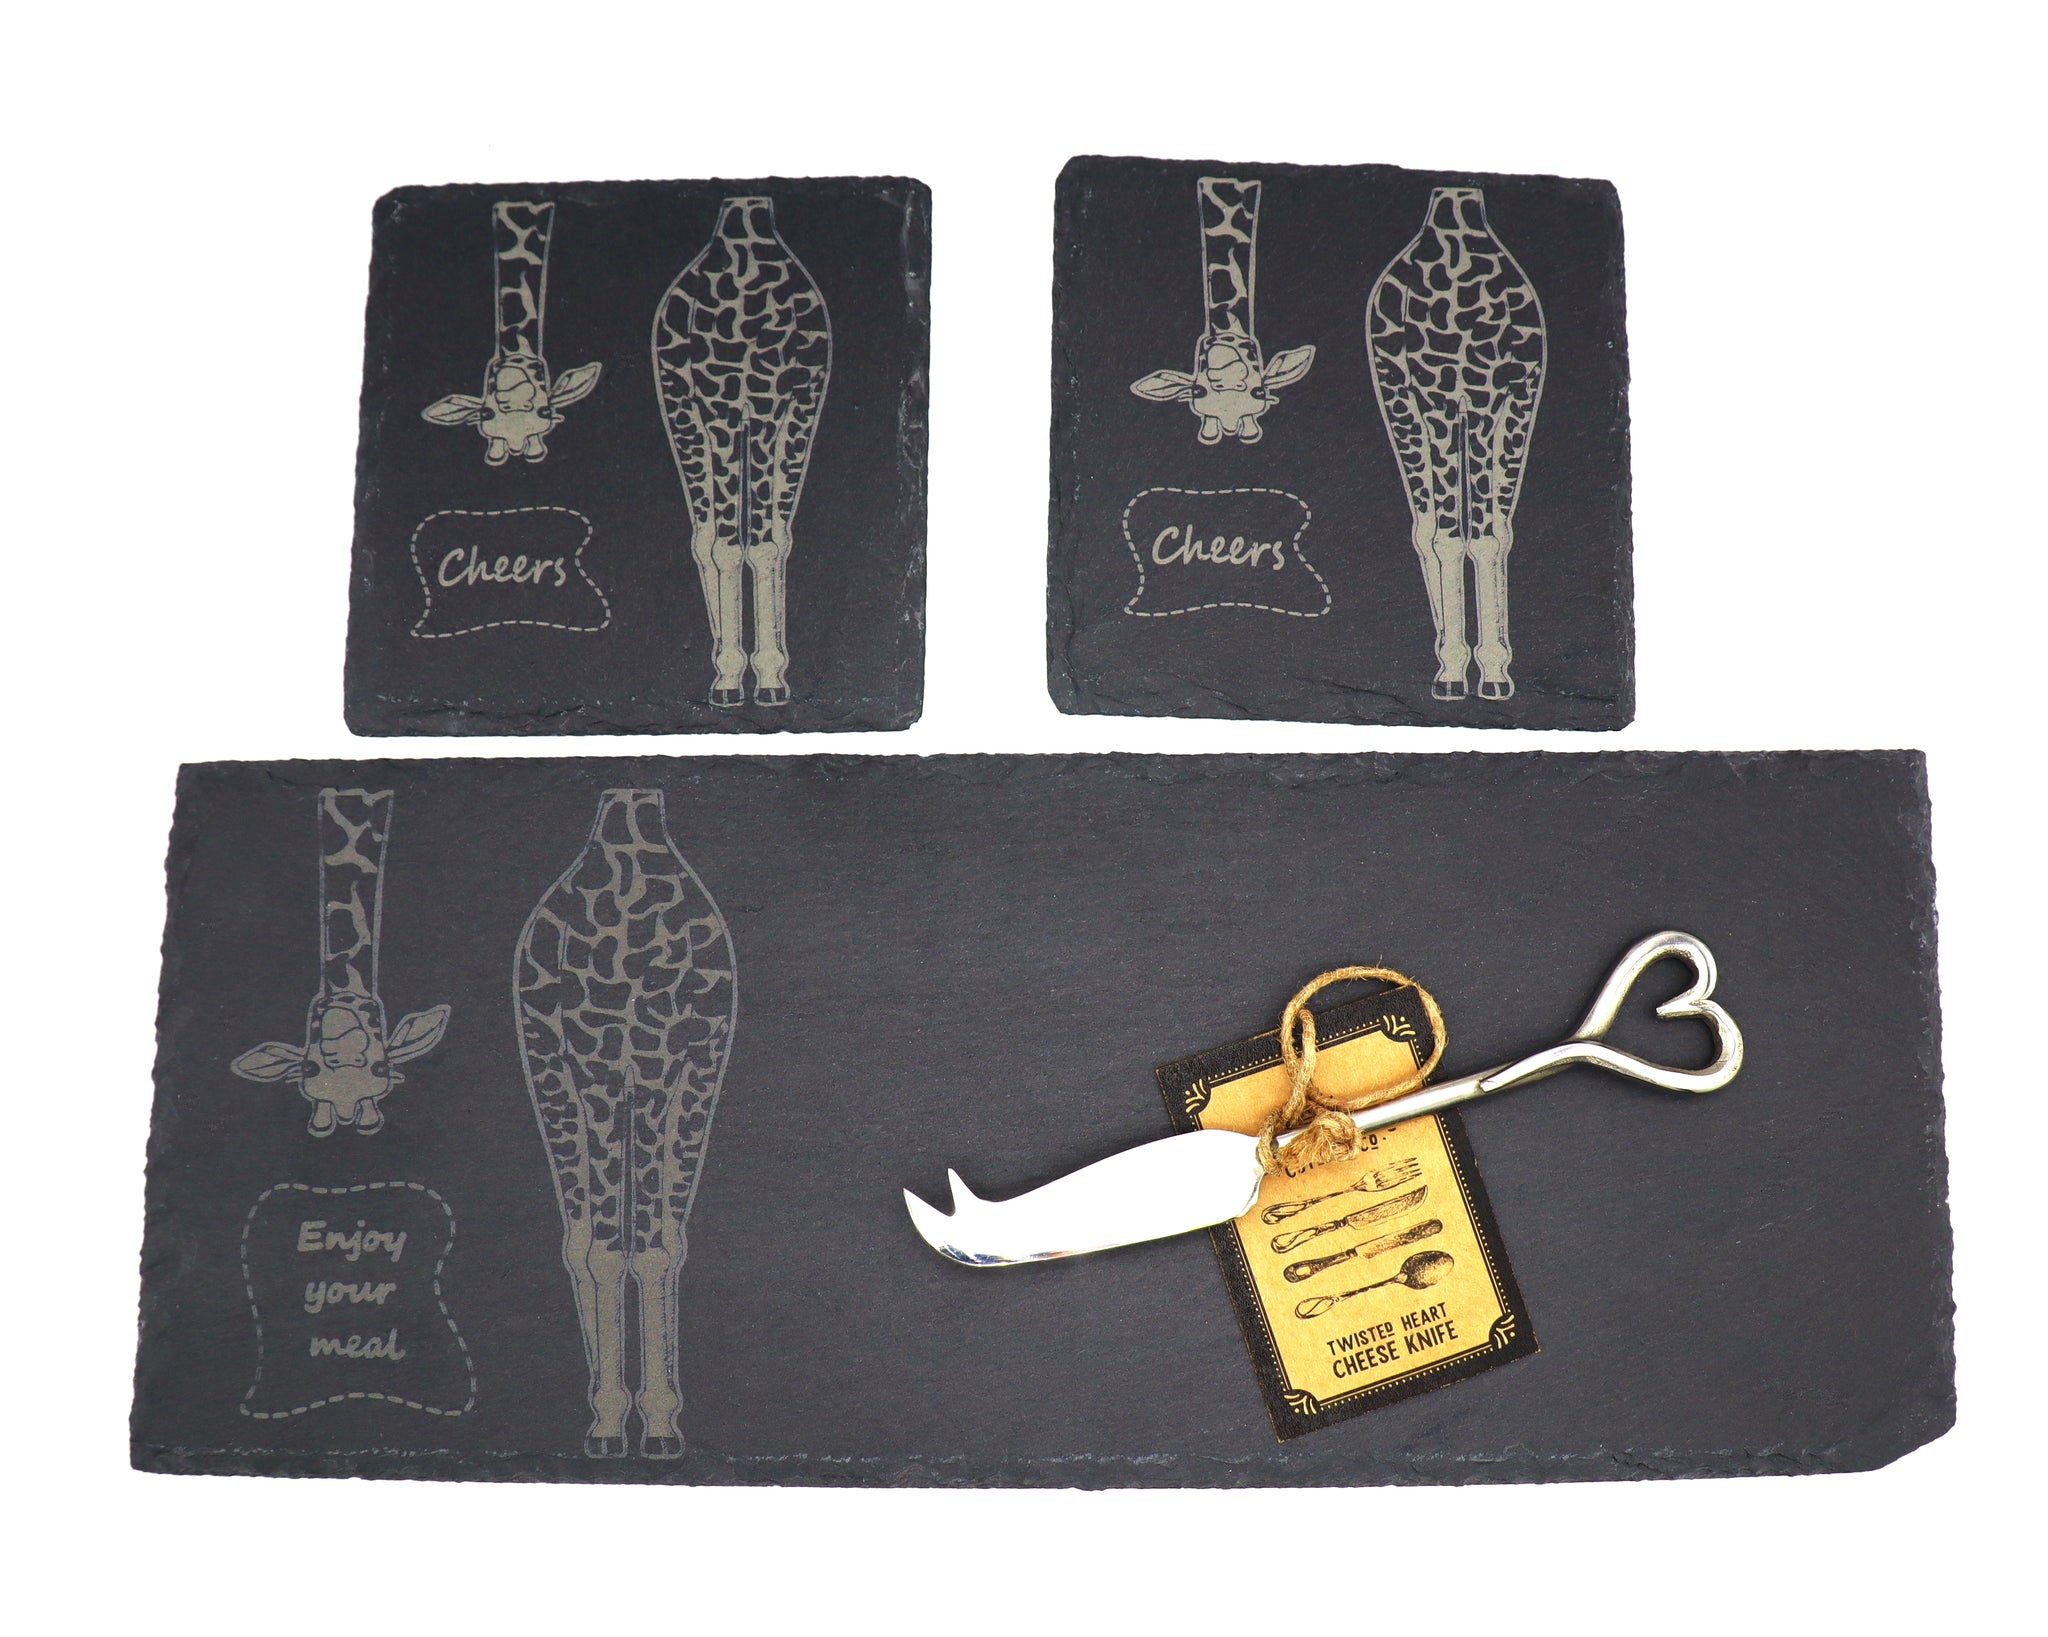 Giraffe - Slate Serving Platter and Coaster Set With Cheese Knife